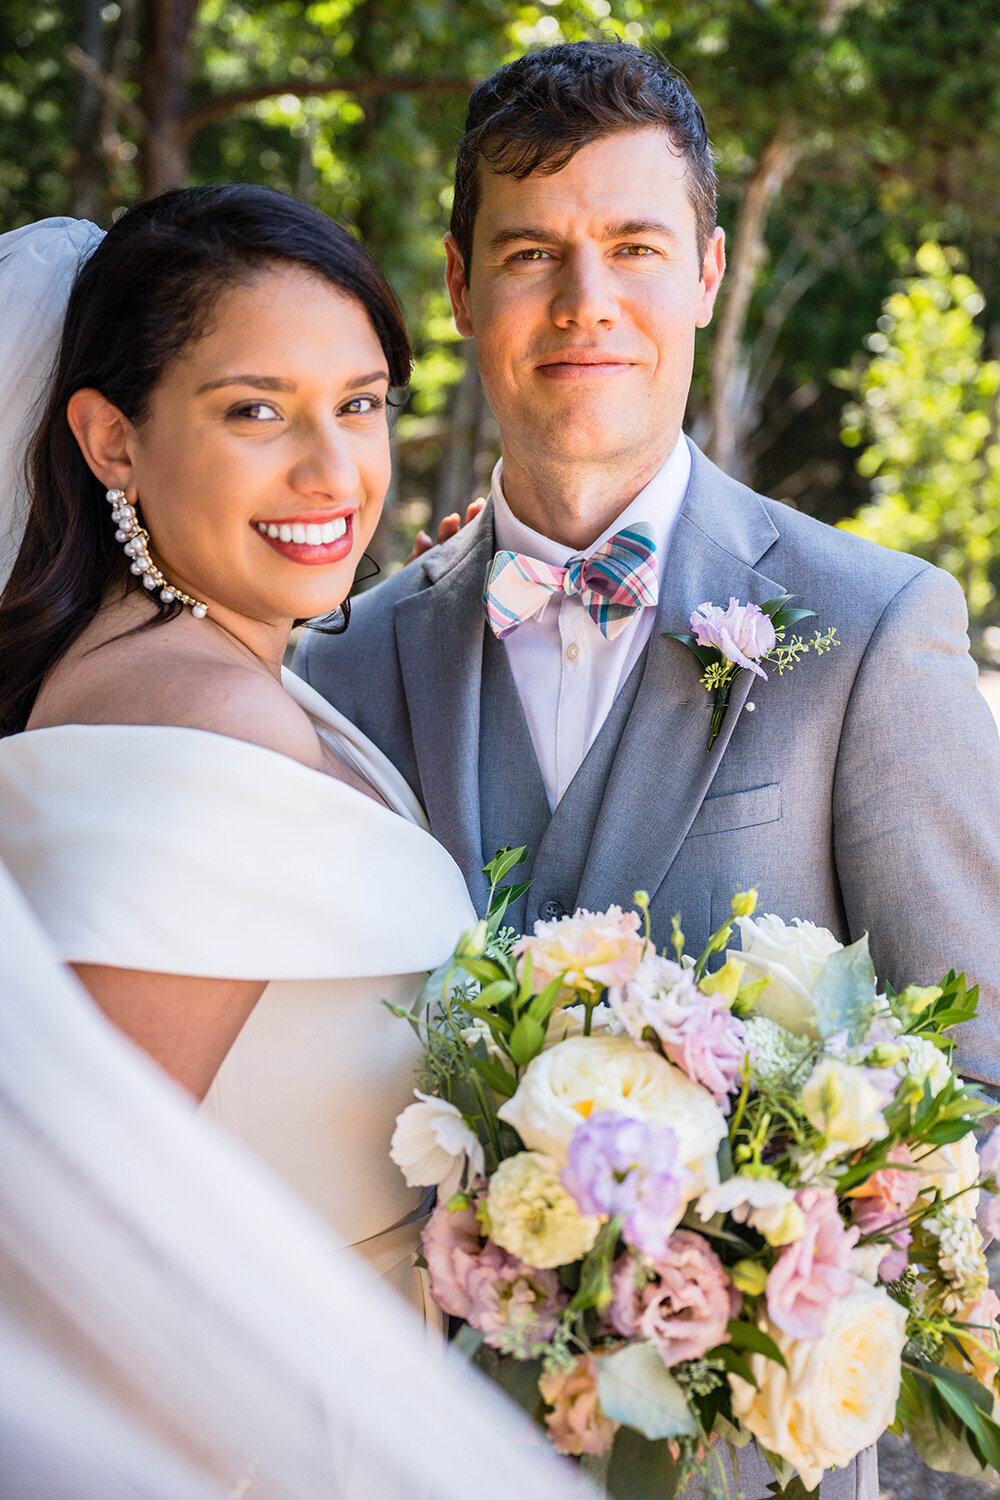 A bride and groom take a formal portrait together under the shade of some trees at Carvin’s Cove in Roanoke, Virginia. The groom is straight on while the bride is slightly angled. The bride’s bouquet takes up the majority of the bottom right of the photo while her veil curves ever so slightly towards the bottom right as well, so as to frame the individuals together.